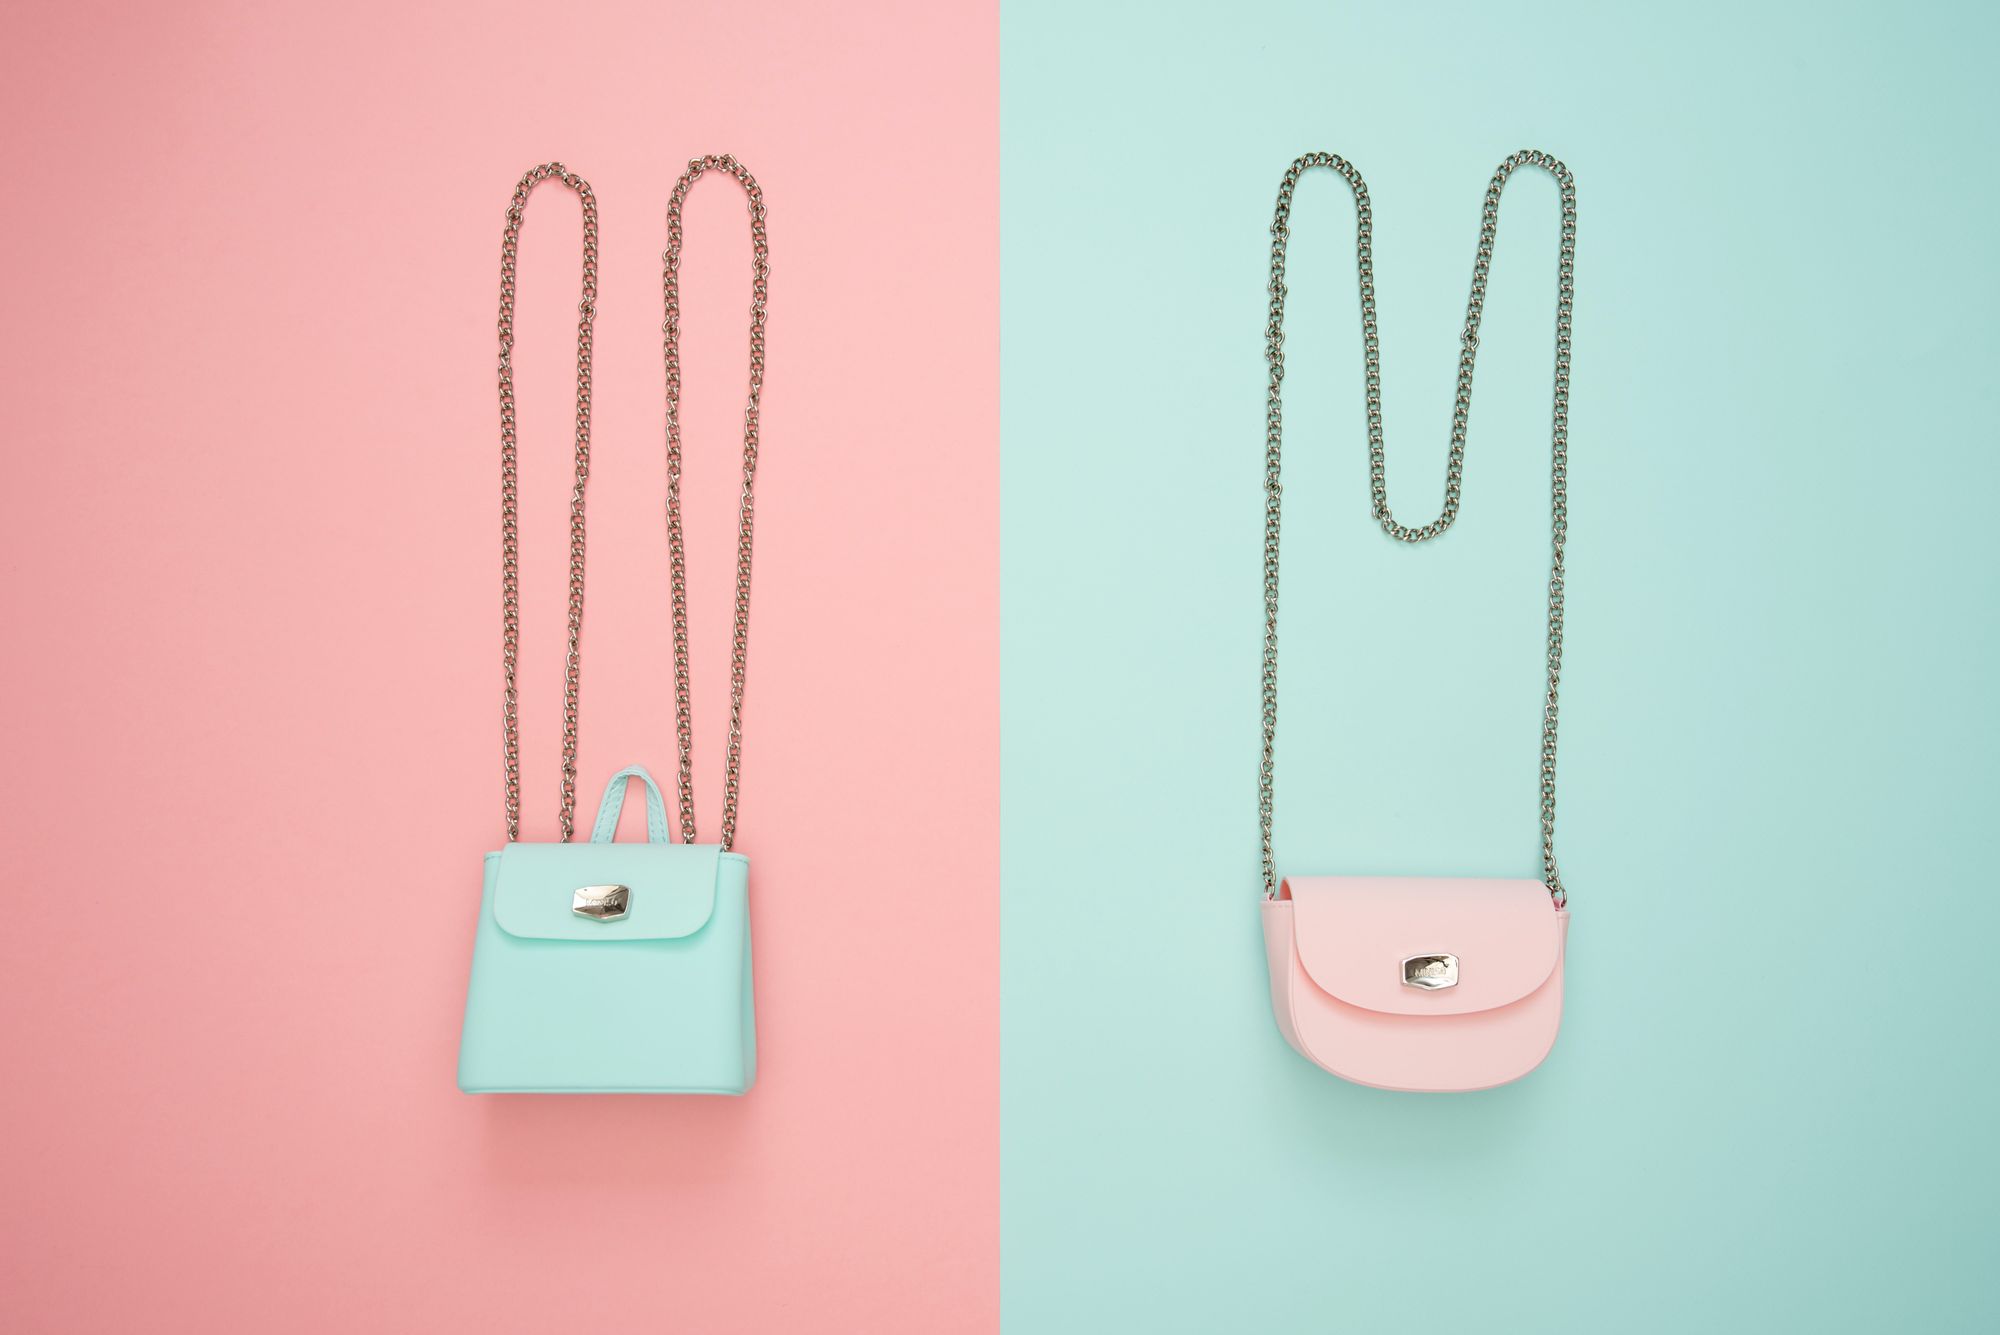 Stock photo of two purses, one pink and one blue.